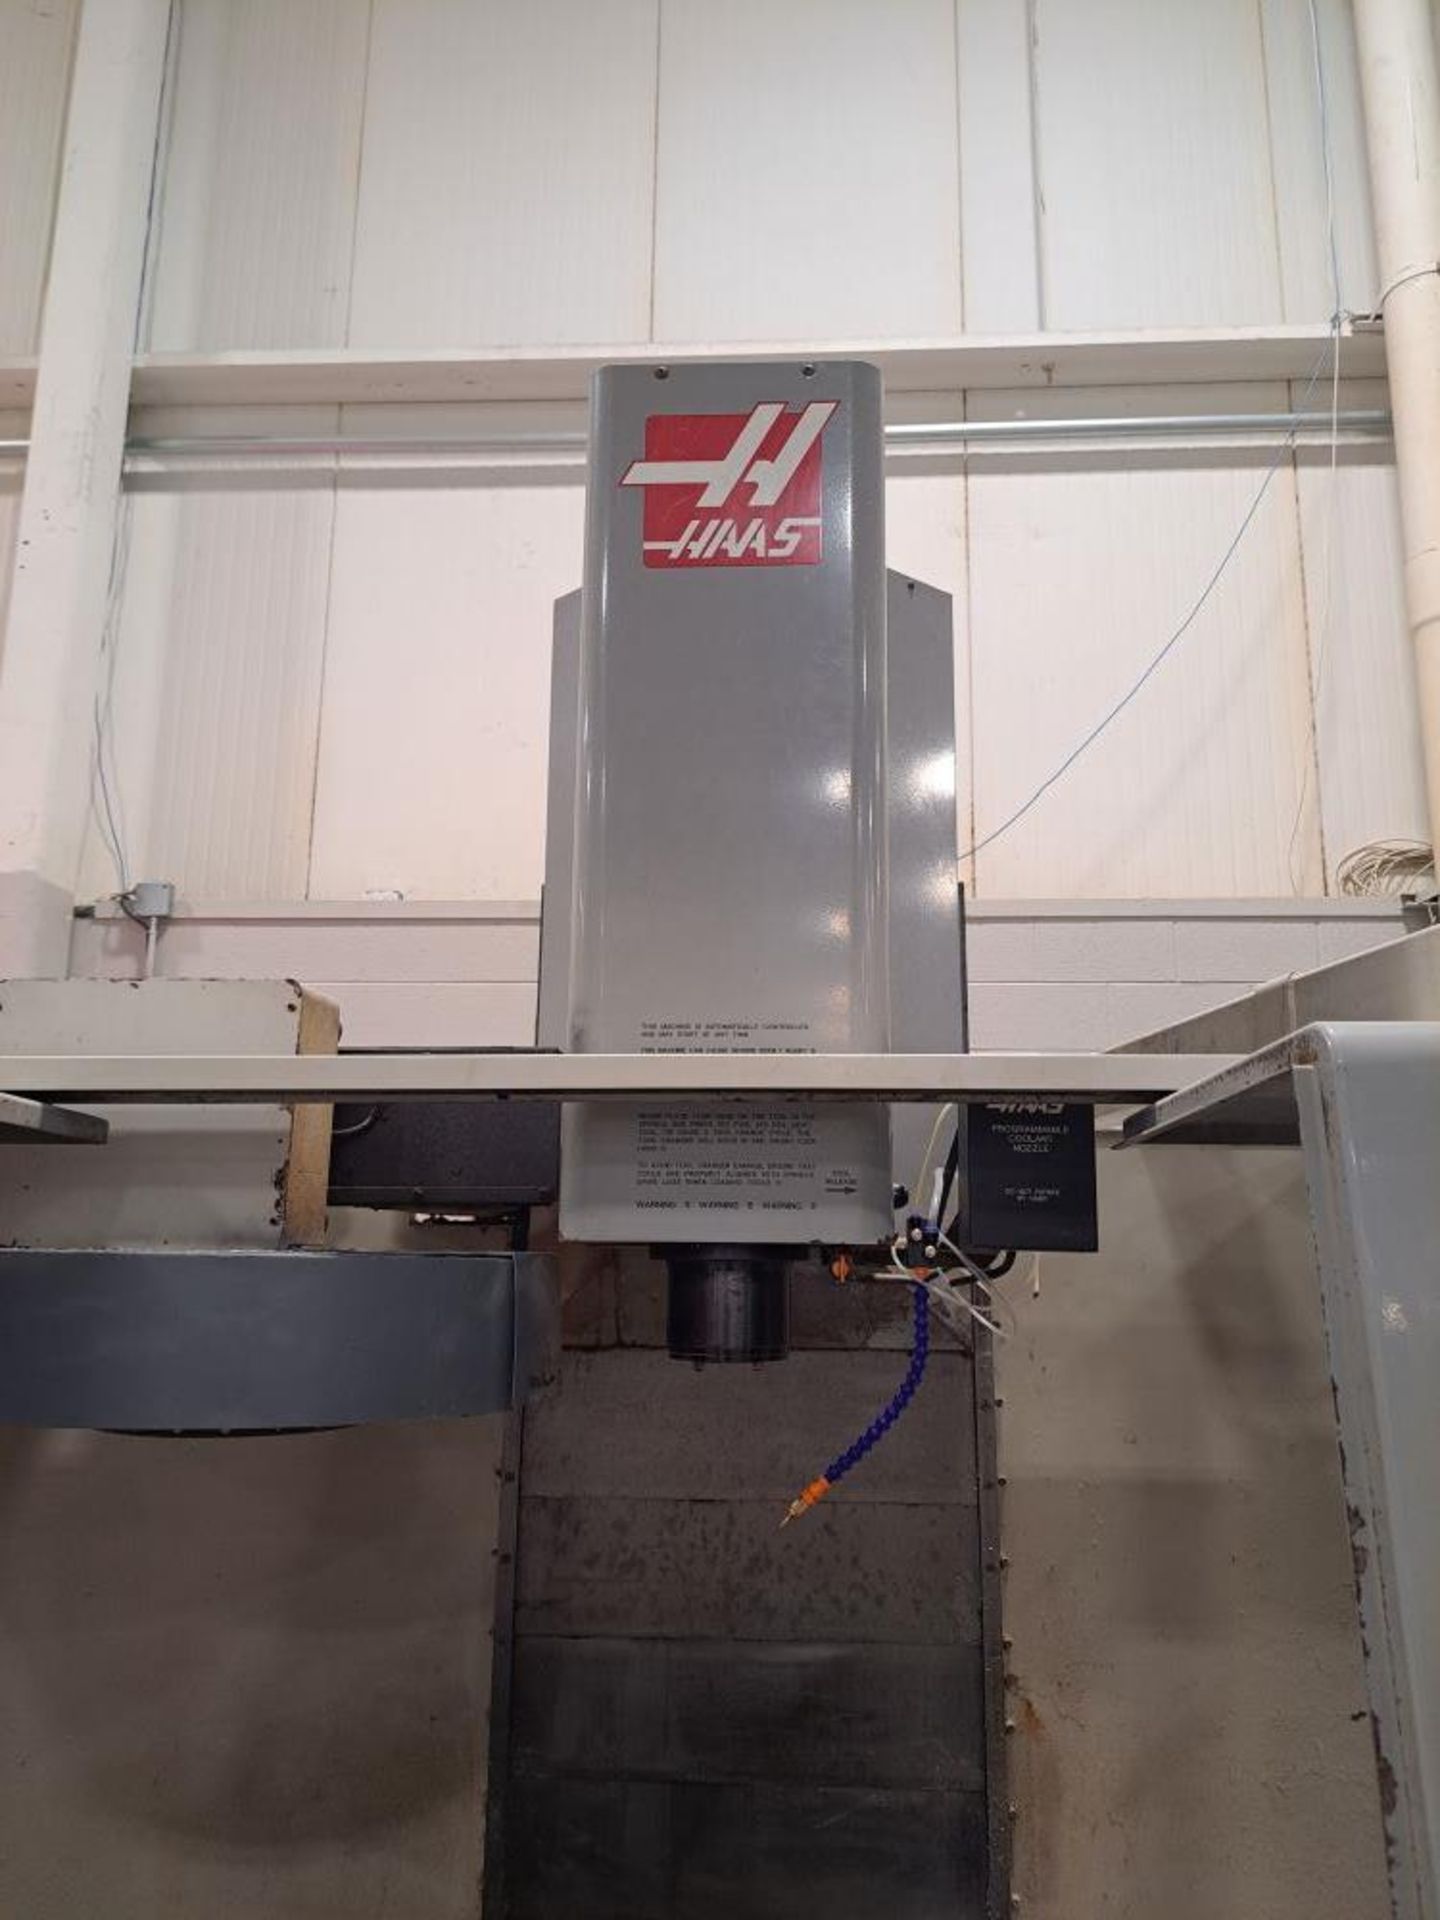 HAAS VF3 CNC VERTICAL MACHINING MILL 1999 IN VERY GOOD WORKING CONDITION - Image 4 of 8